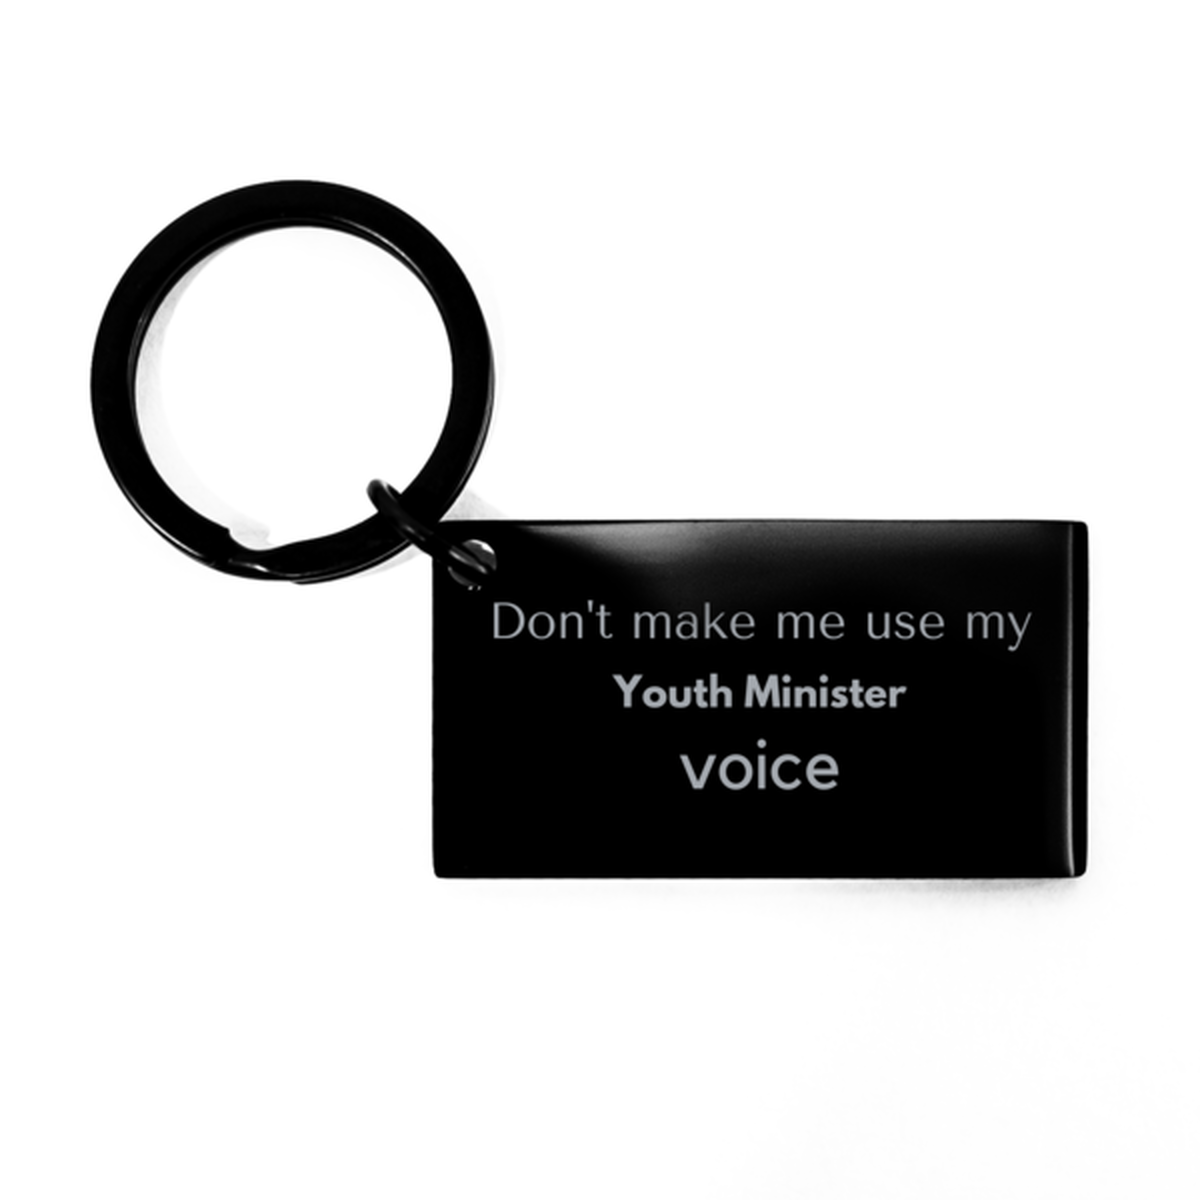 Don't make me use my Youth Minister voice, Sarcasm Youth Minister Gifts, Christmas Youth Minister Keychain Birthday Unique Gifts For Youth Minister Coworkers, Men, Women, Colleague, Friends